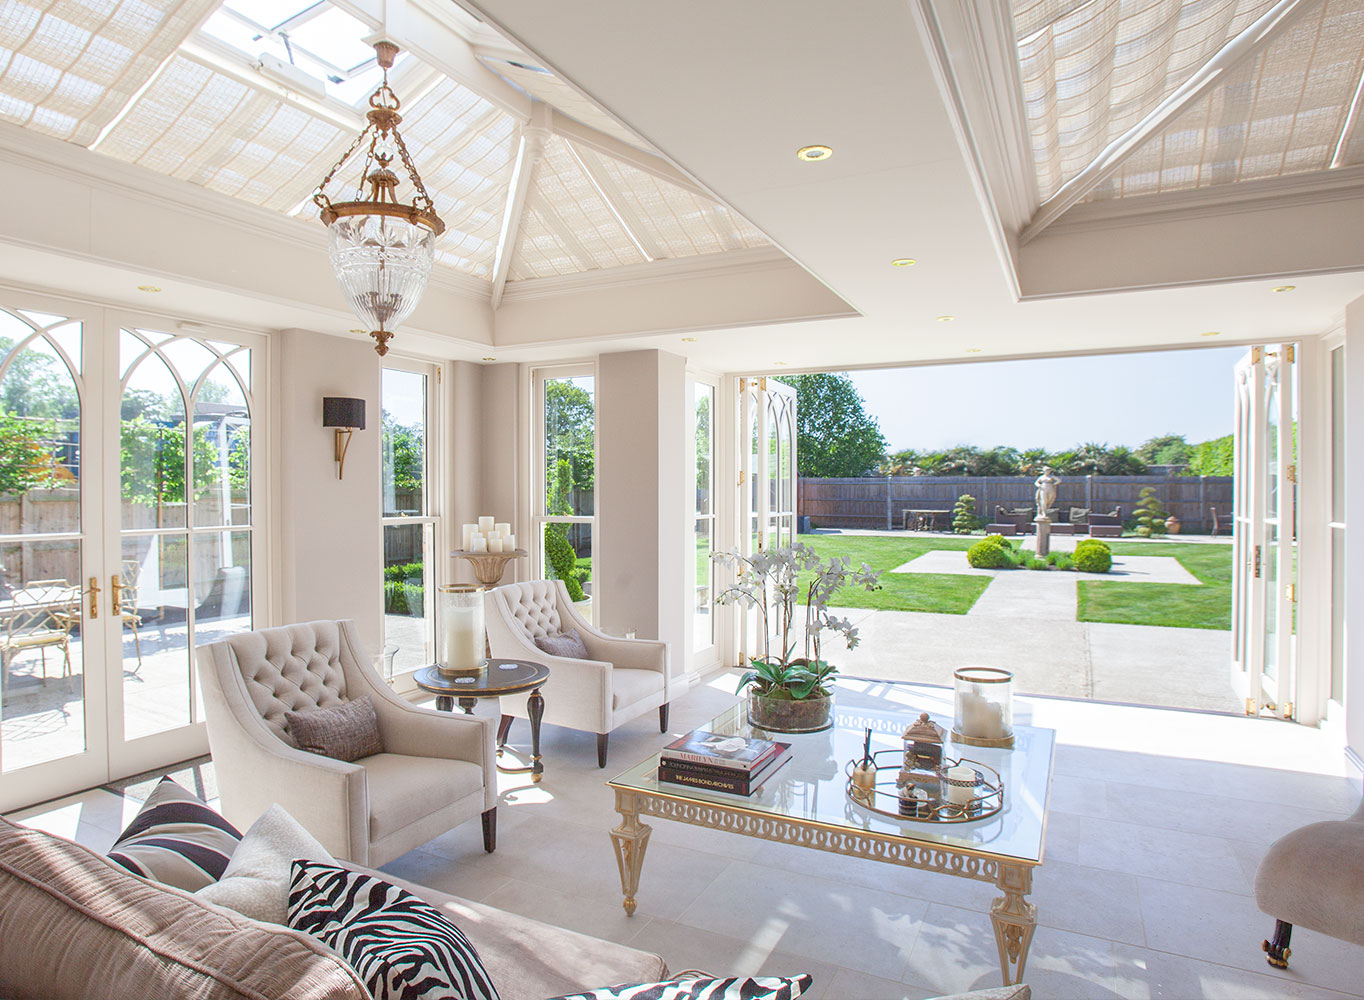 Sitting room with views to the garden